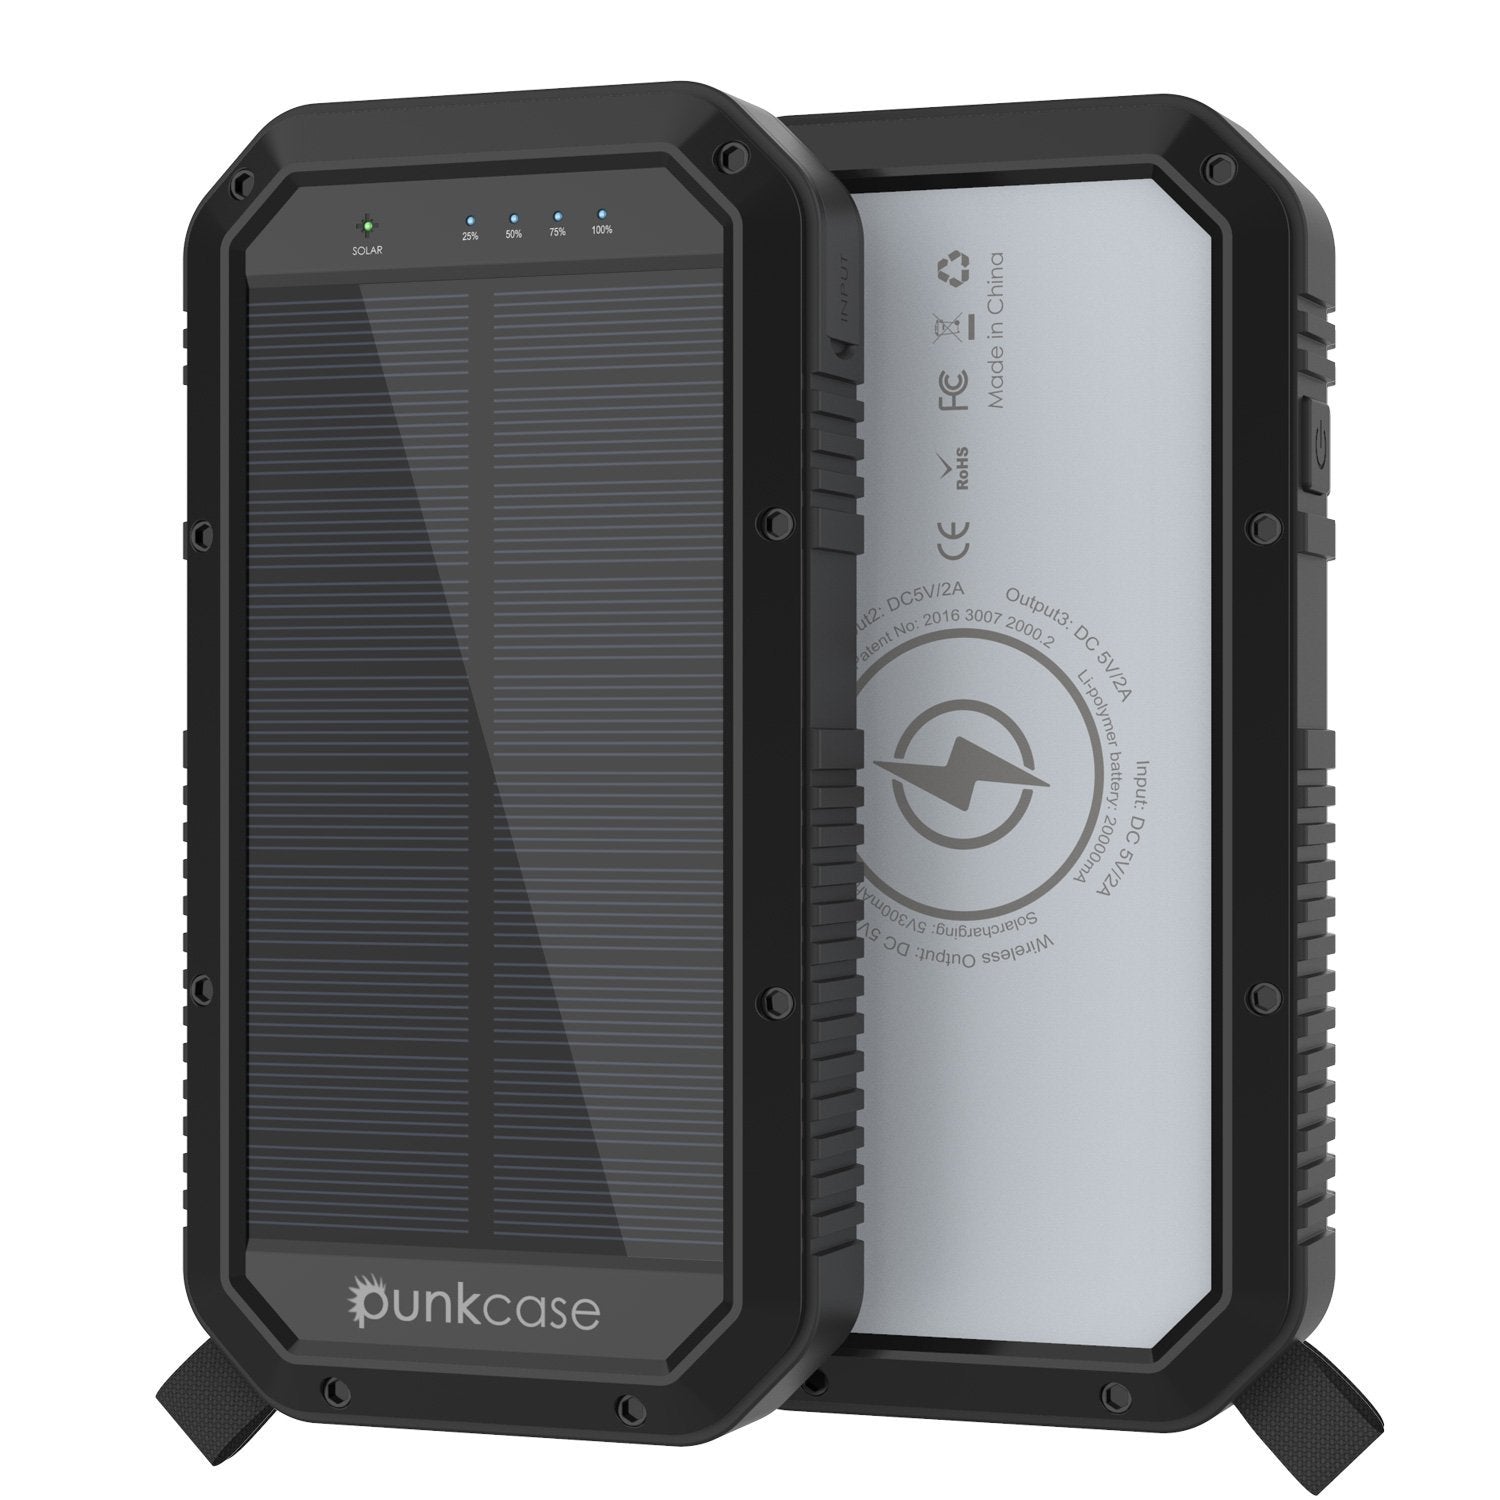 PunkCase Solar Wireless PowerBank 20000 mAh Battery Pack for iPhone 15/14/13/12/11/X & Wireless, iPad, Samsung Galaxy S24/23/22/21/10/9 and Many More [Black]